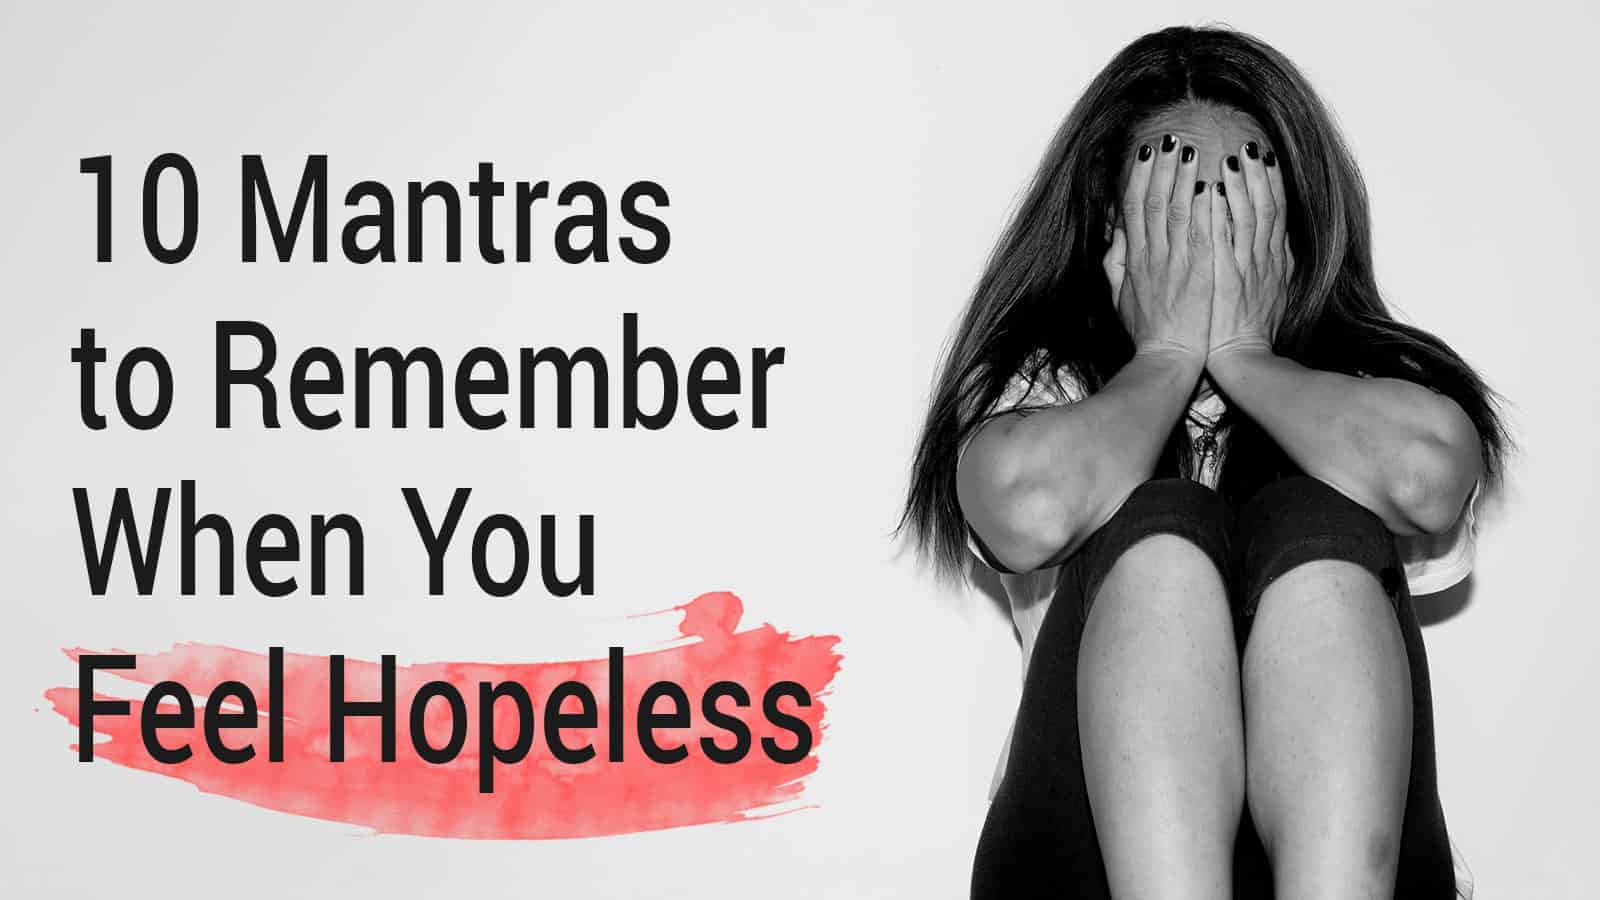 10 Mantras to Remember When You Feel Hopeless